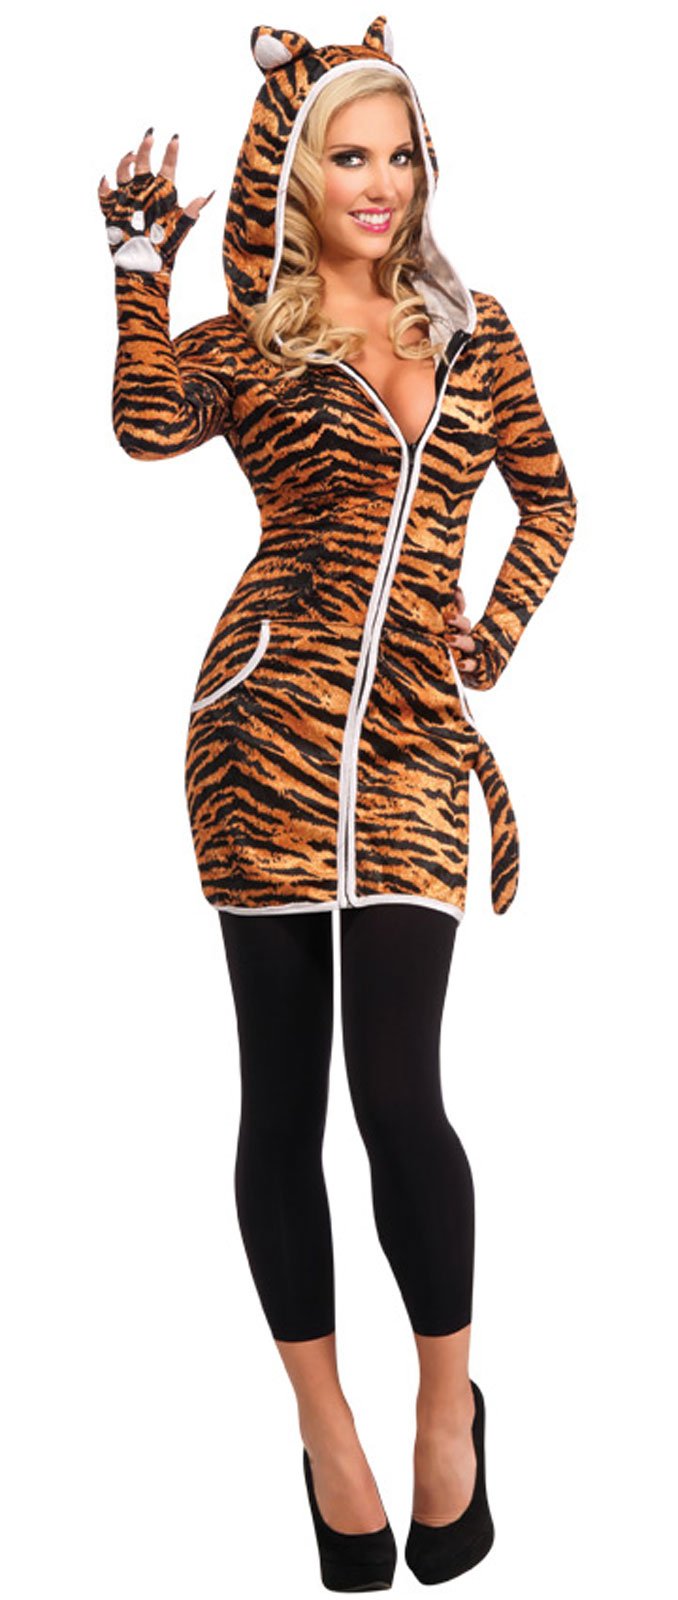 ...Adult Costume which includes a sexy striped crushed velvet hooded dress ...